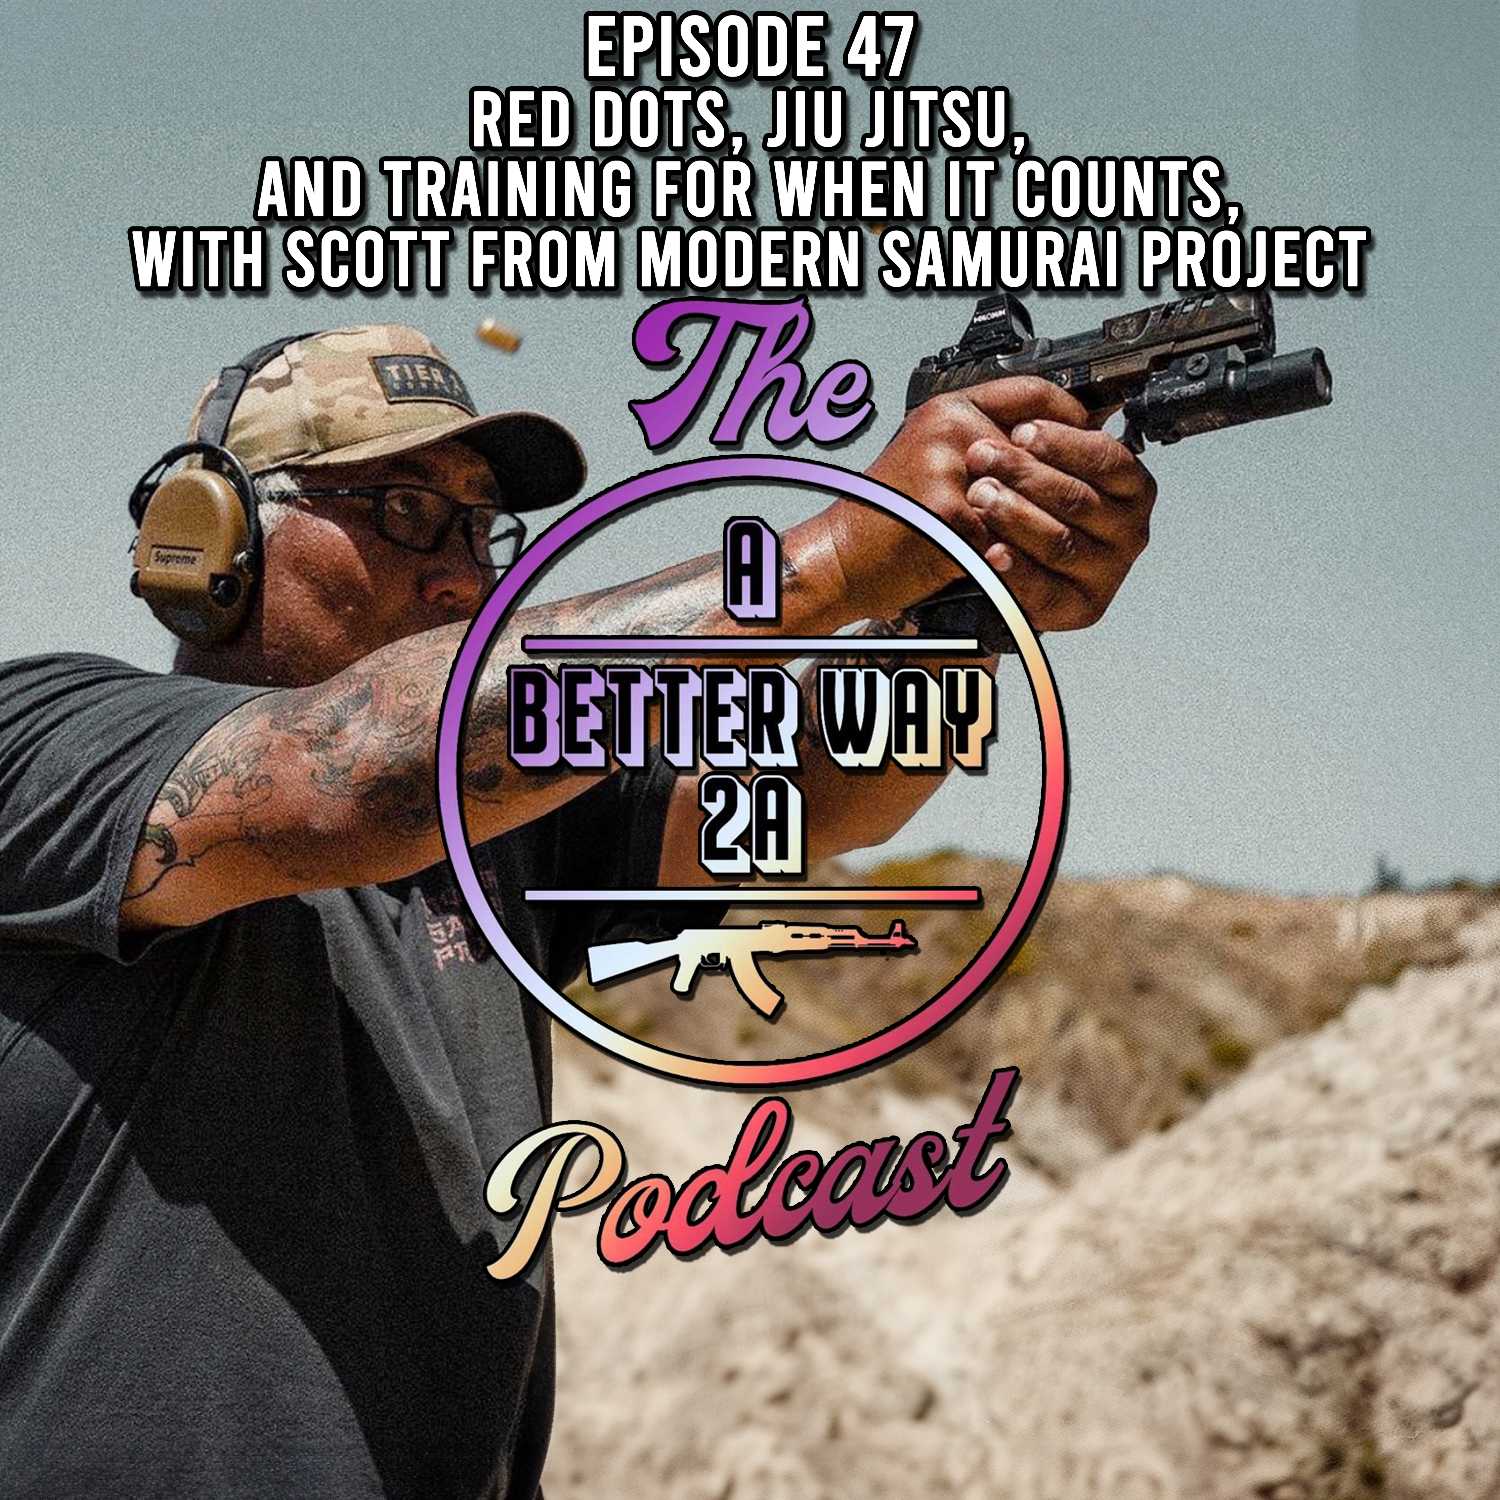 Episode 47 - Red Dots, Jiu Jitsu, And Training For When It Counts With Scott From Modern Samurai Project